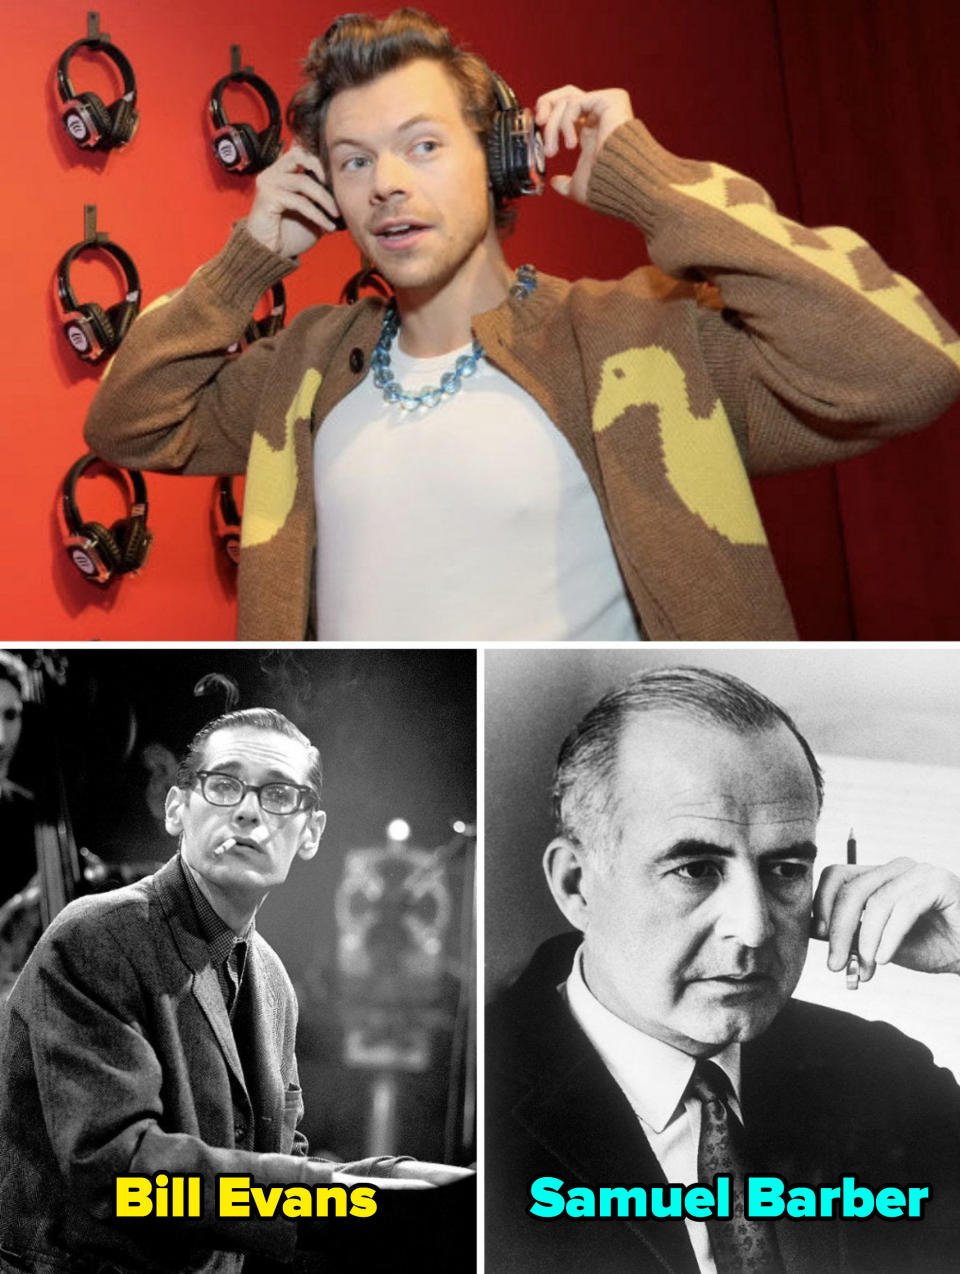 Styles at "Harry's House" release party; Evans performing in 1965; Barber posing for a portrait in 1966